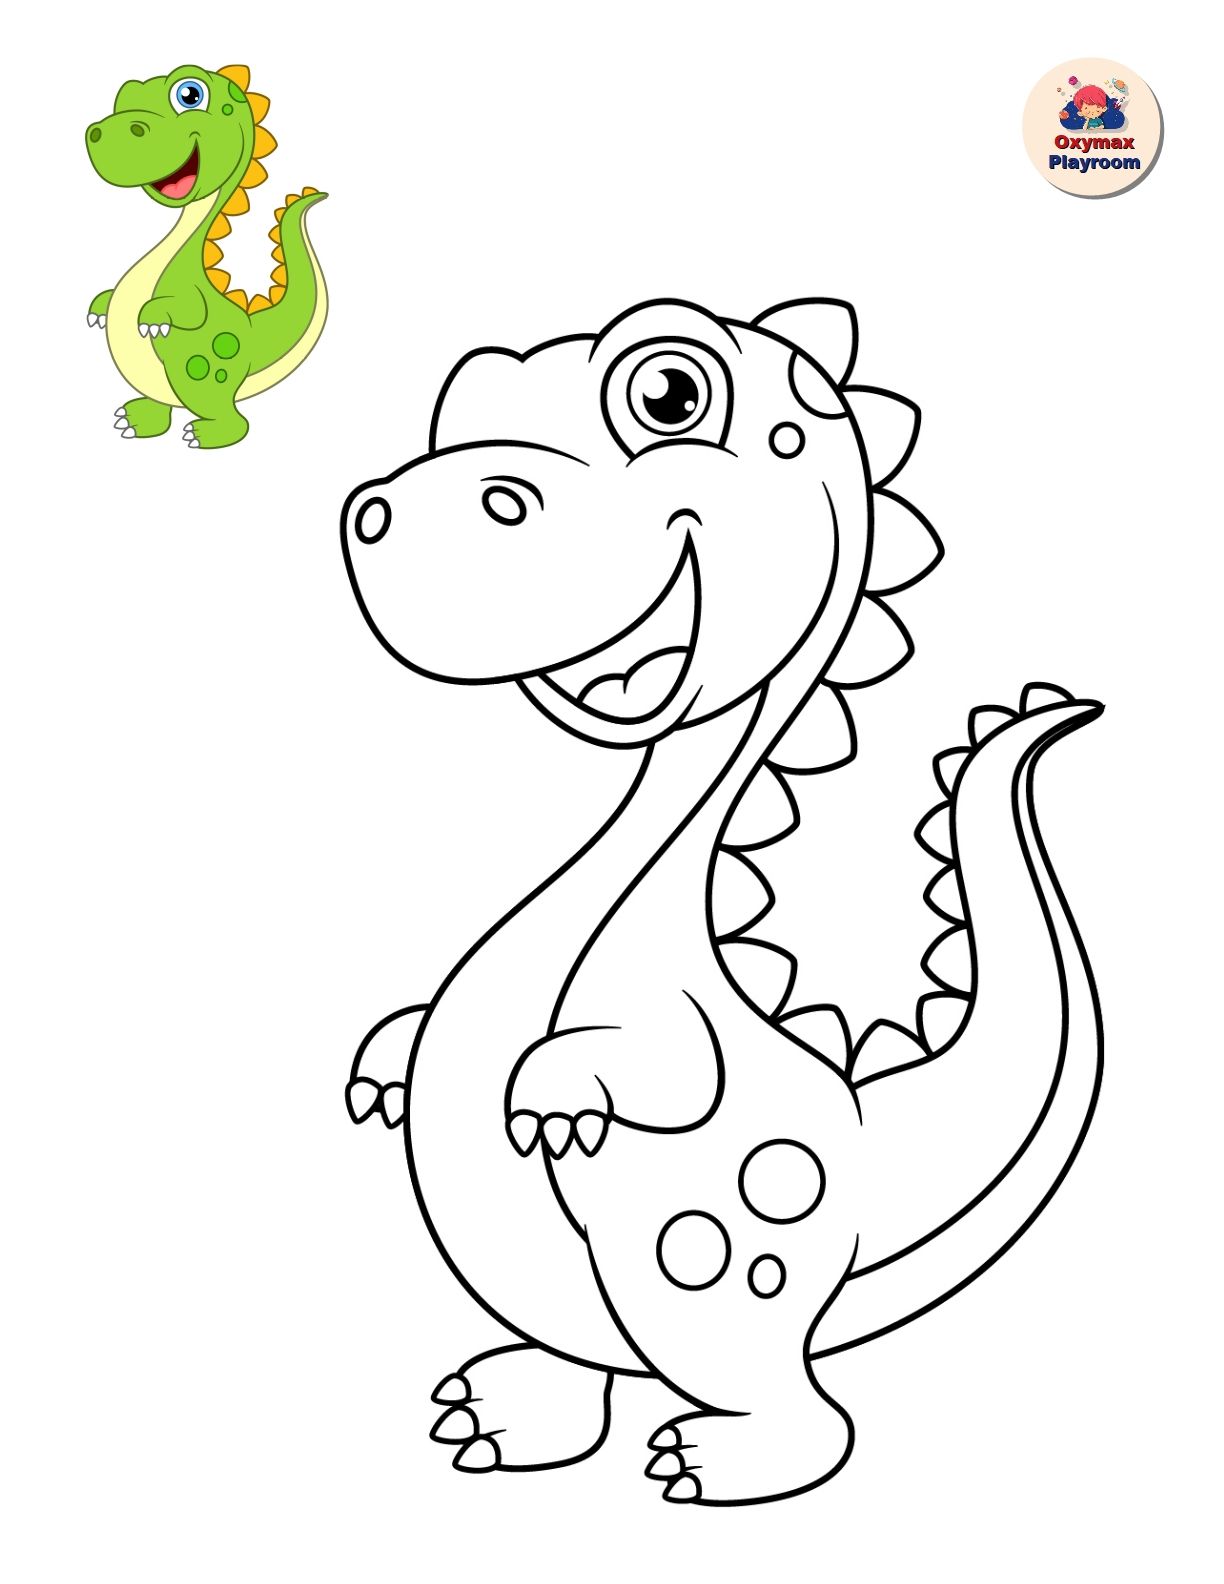 Coloring Pages For Children Dinosaurs 